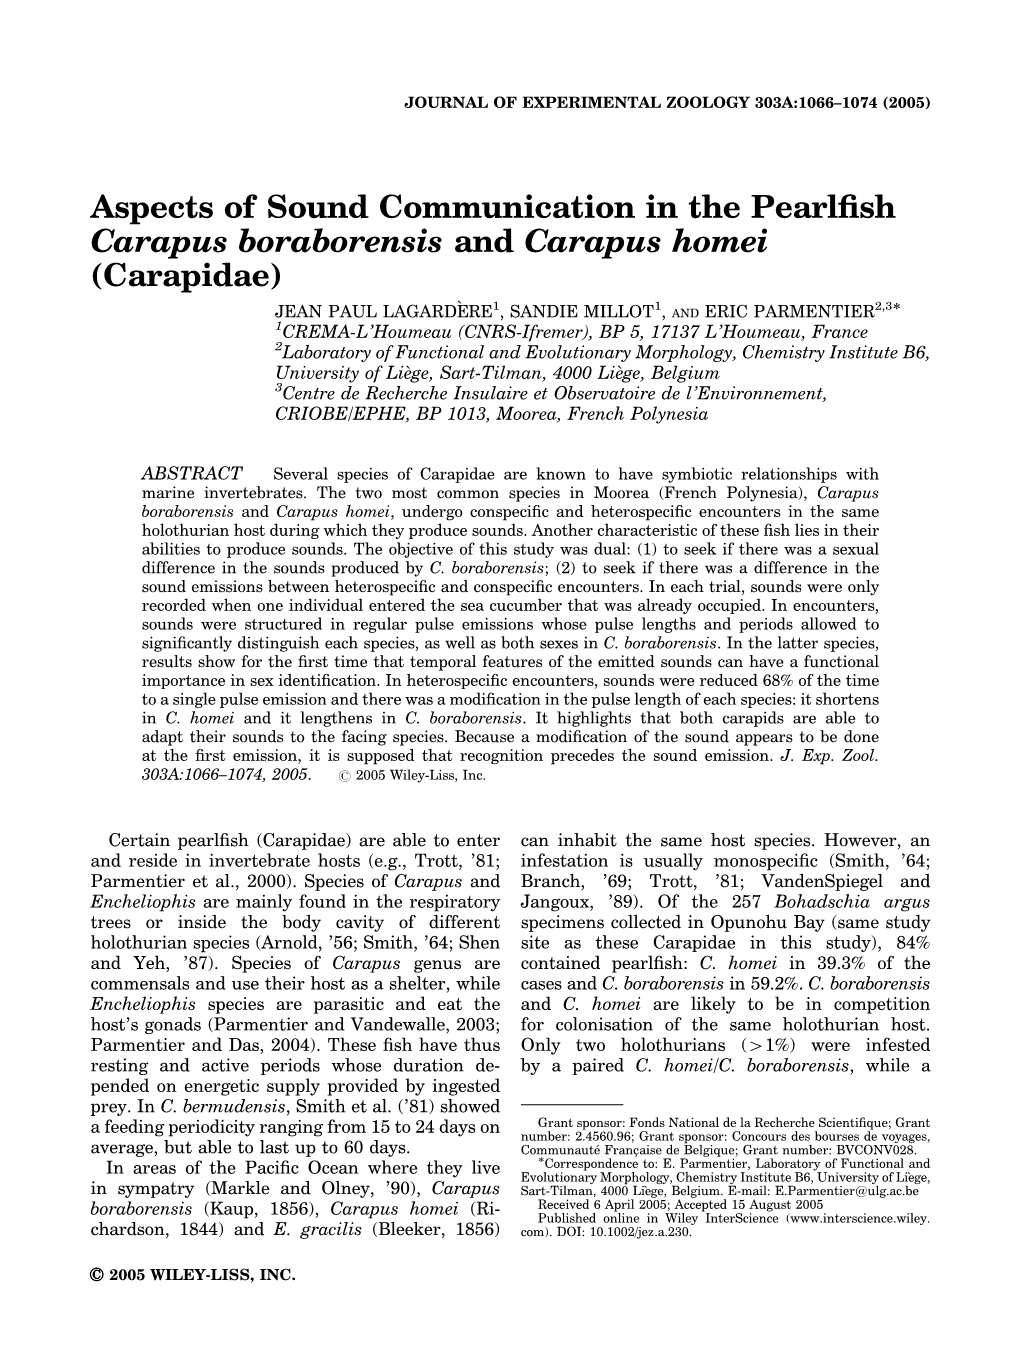 Aspects of Sound Communication in the Pearlfish Carapus Boraborensis